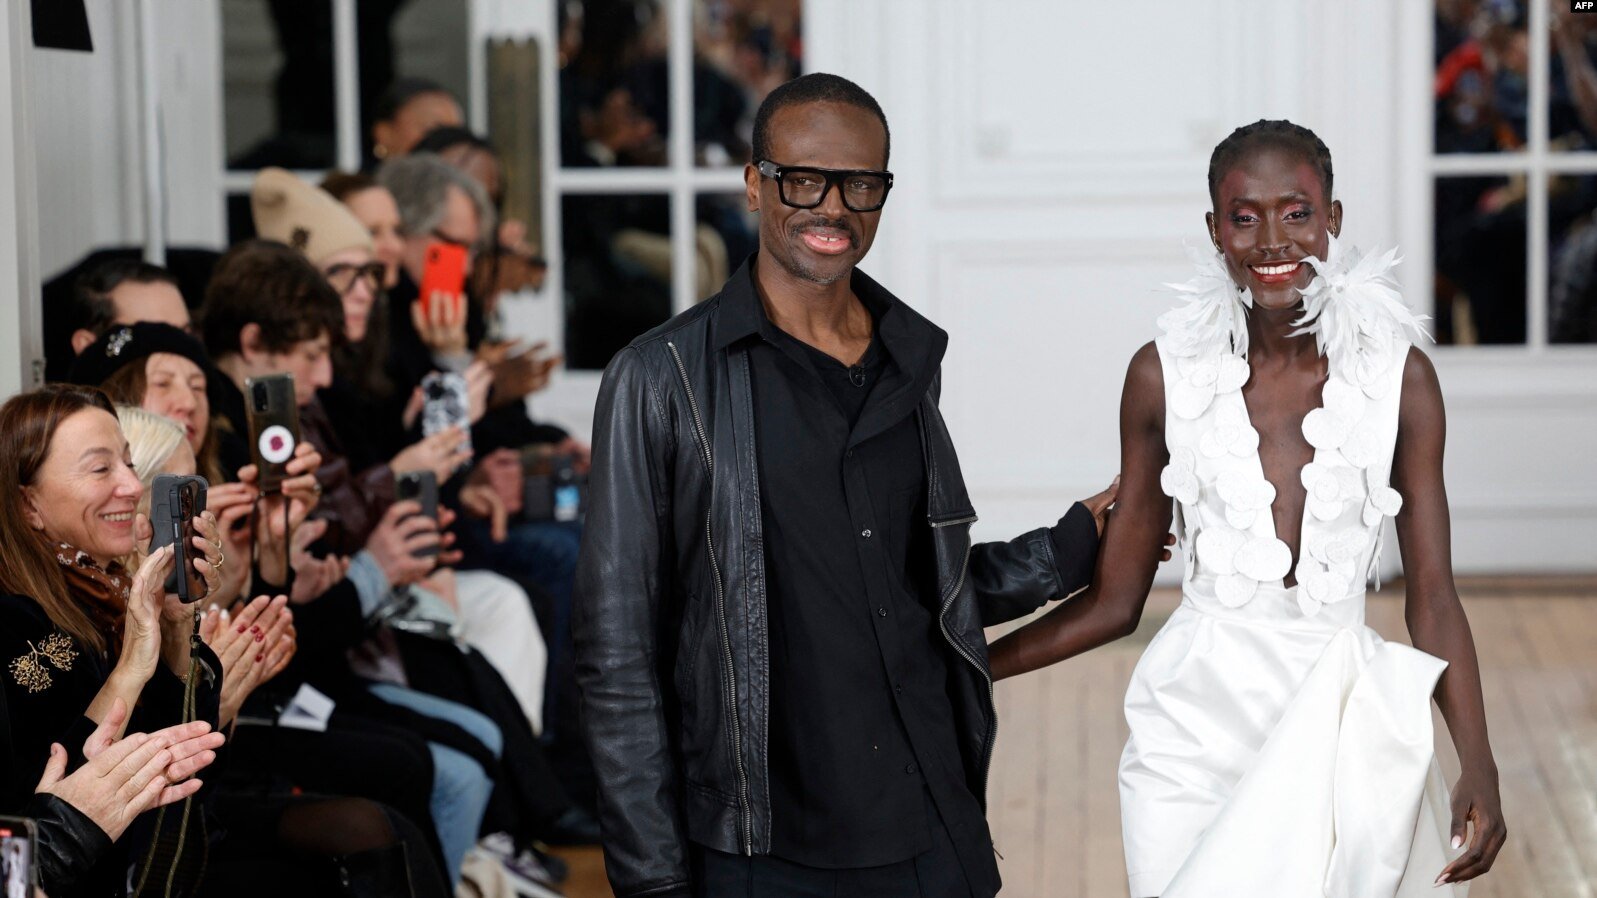 Cameroon designer brings African couture to Paris Fashion Week - The ...